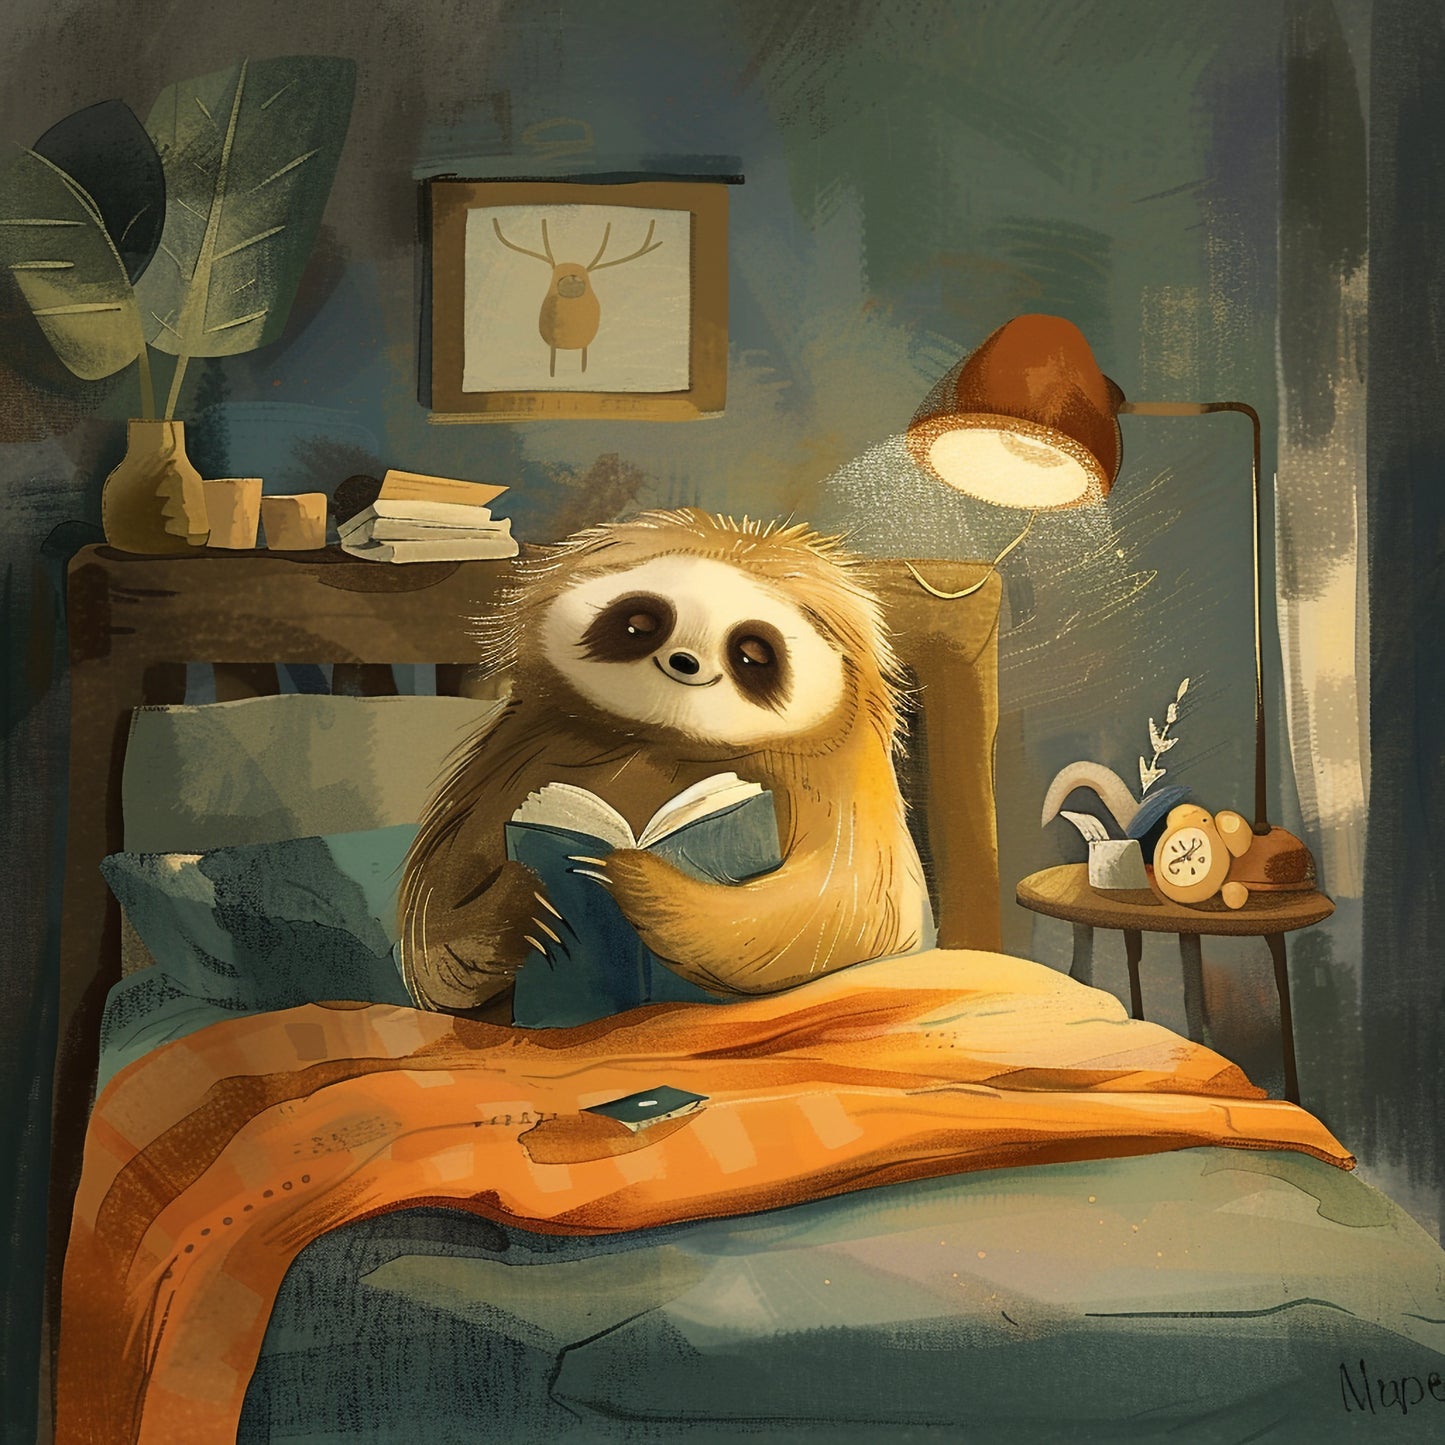 Cozy Evening With a Book Sloth Cartoon Illustration